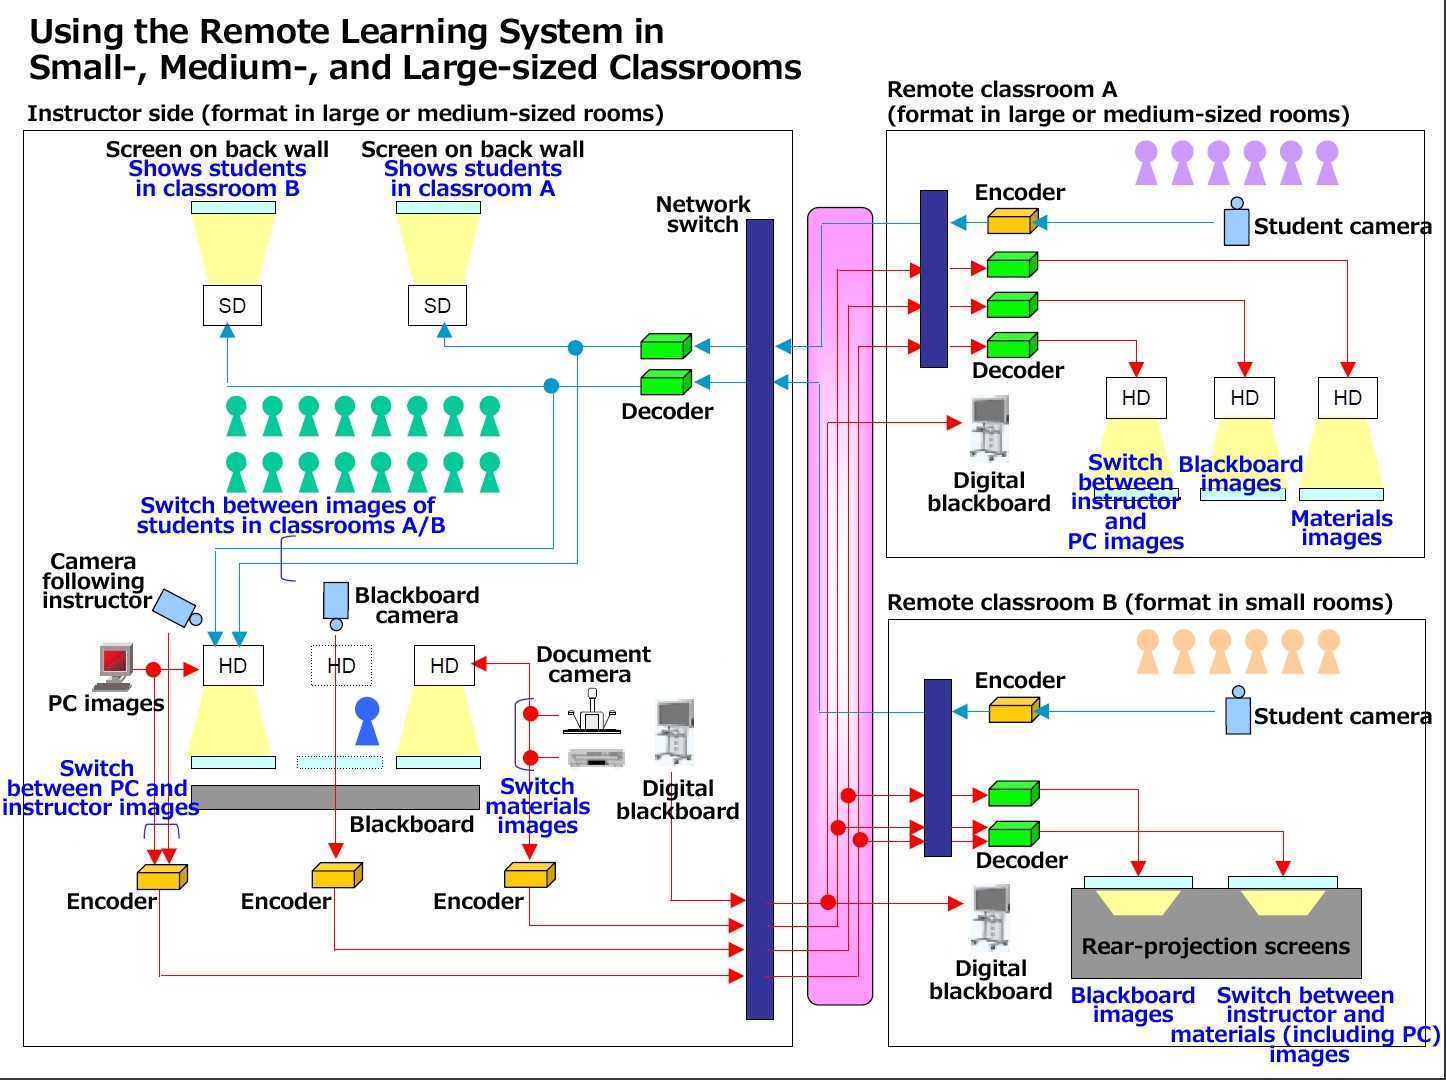 Using the Remote Learning System in Small-, Medium-, and Large-sized Classrooms